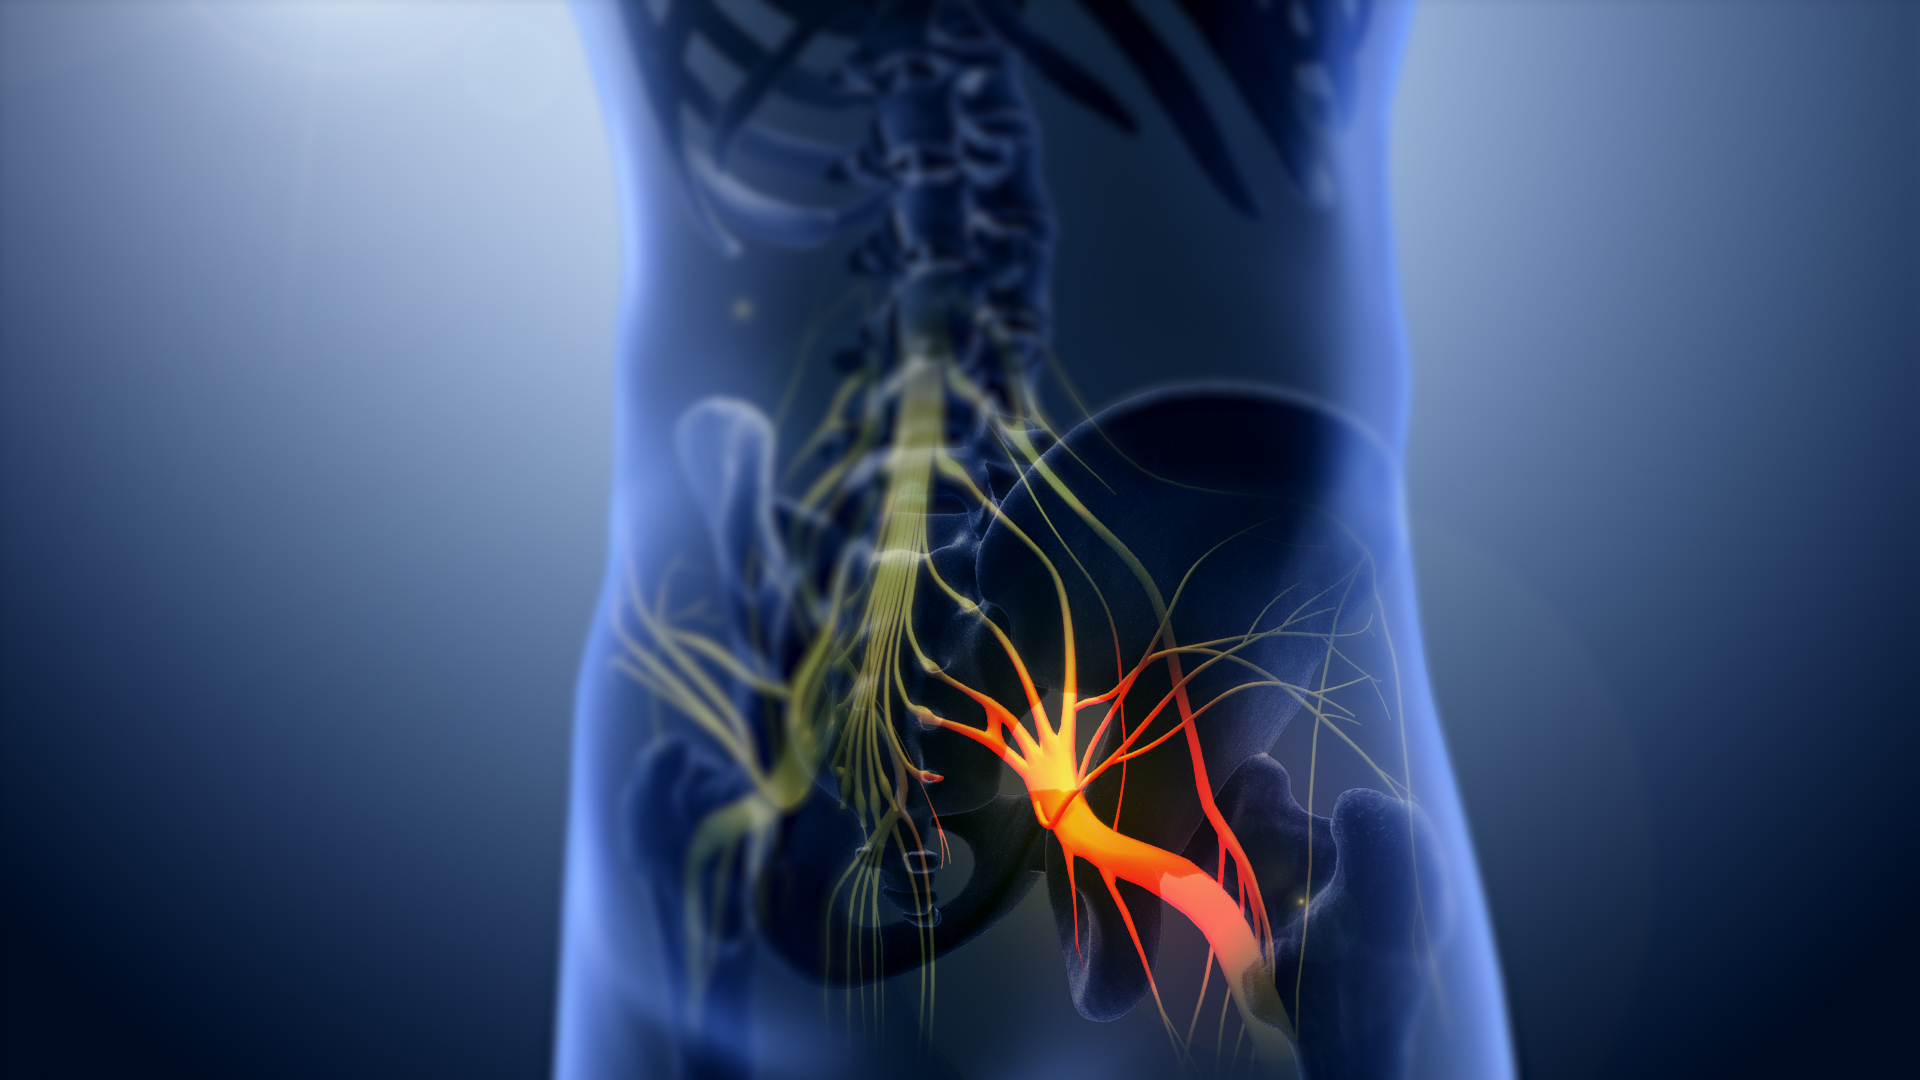 Sciatica pain is caused by a problem with the sciatica nerve. This pain can progress to the hips, legs and buttocks